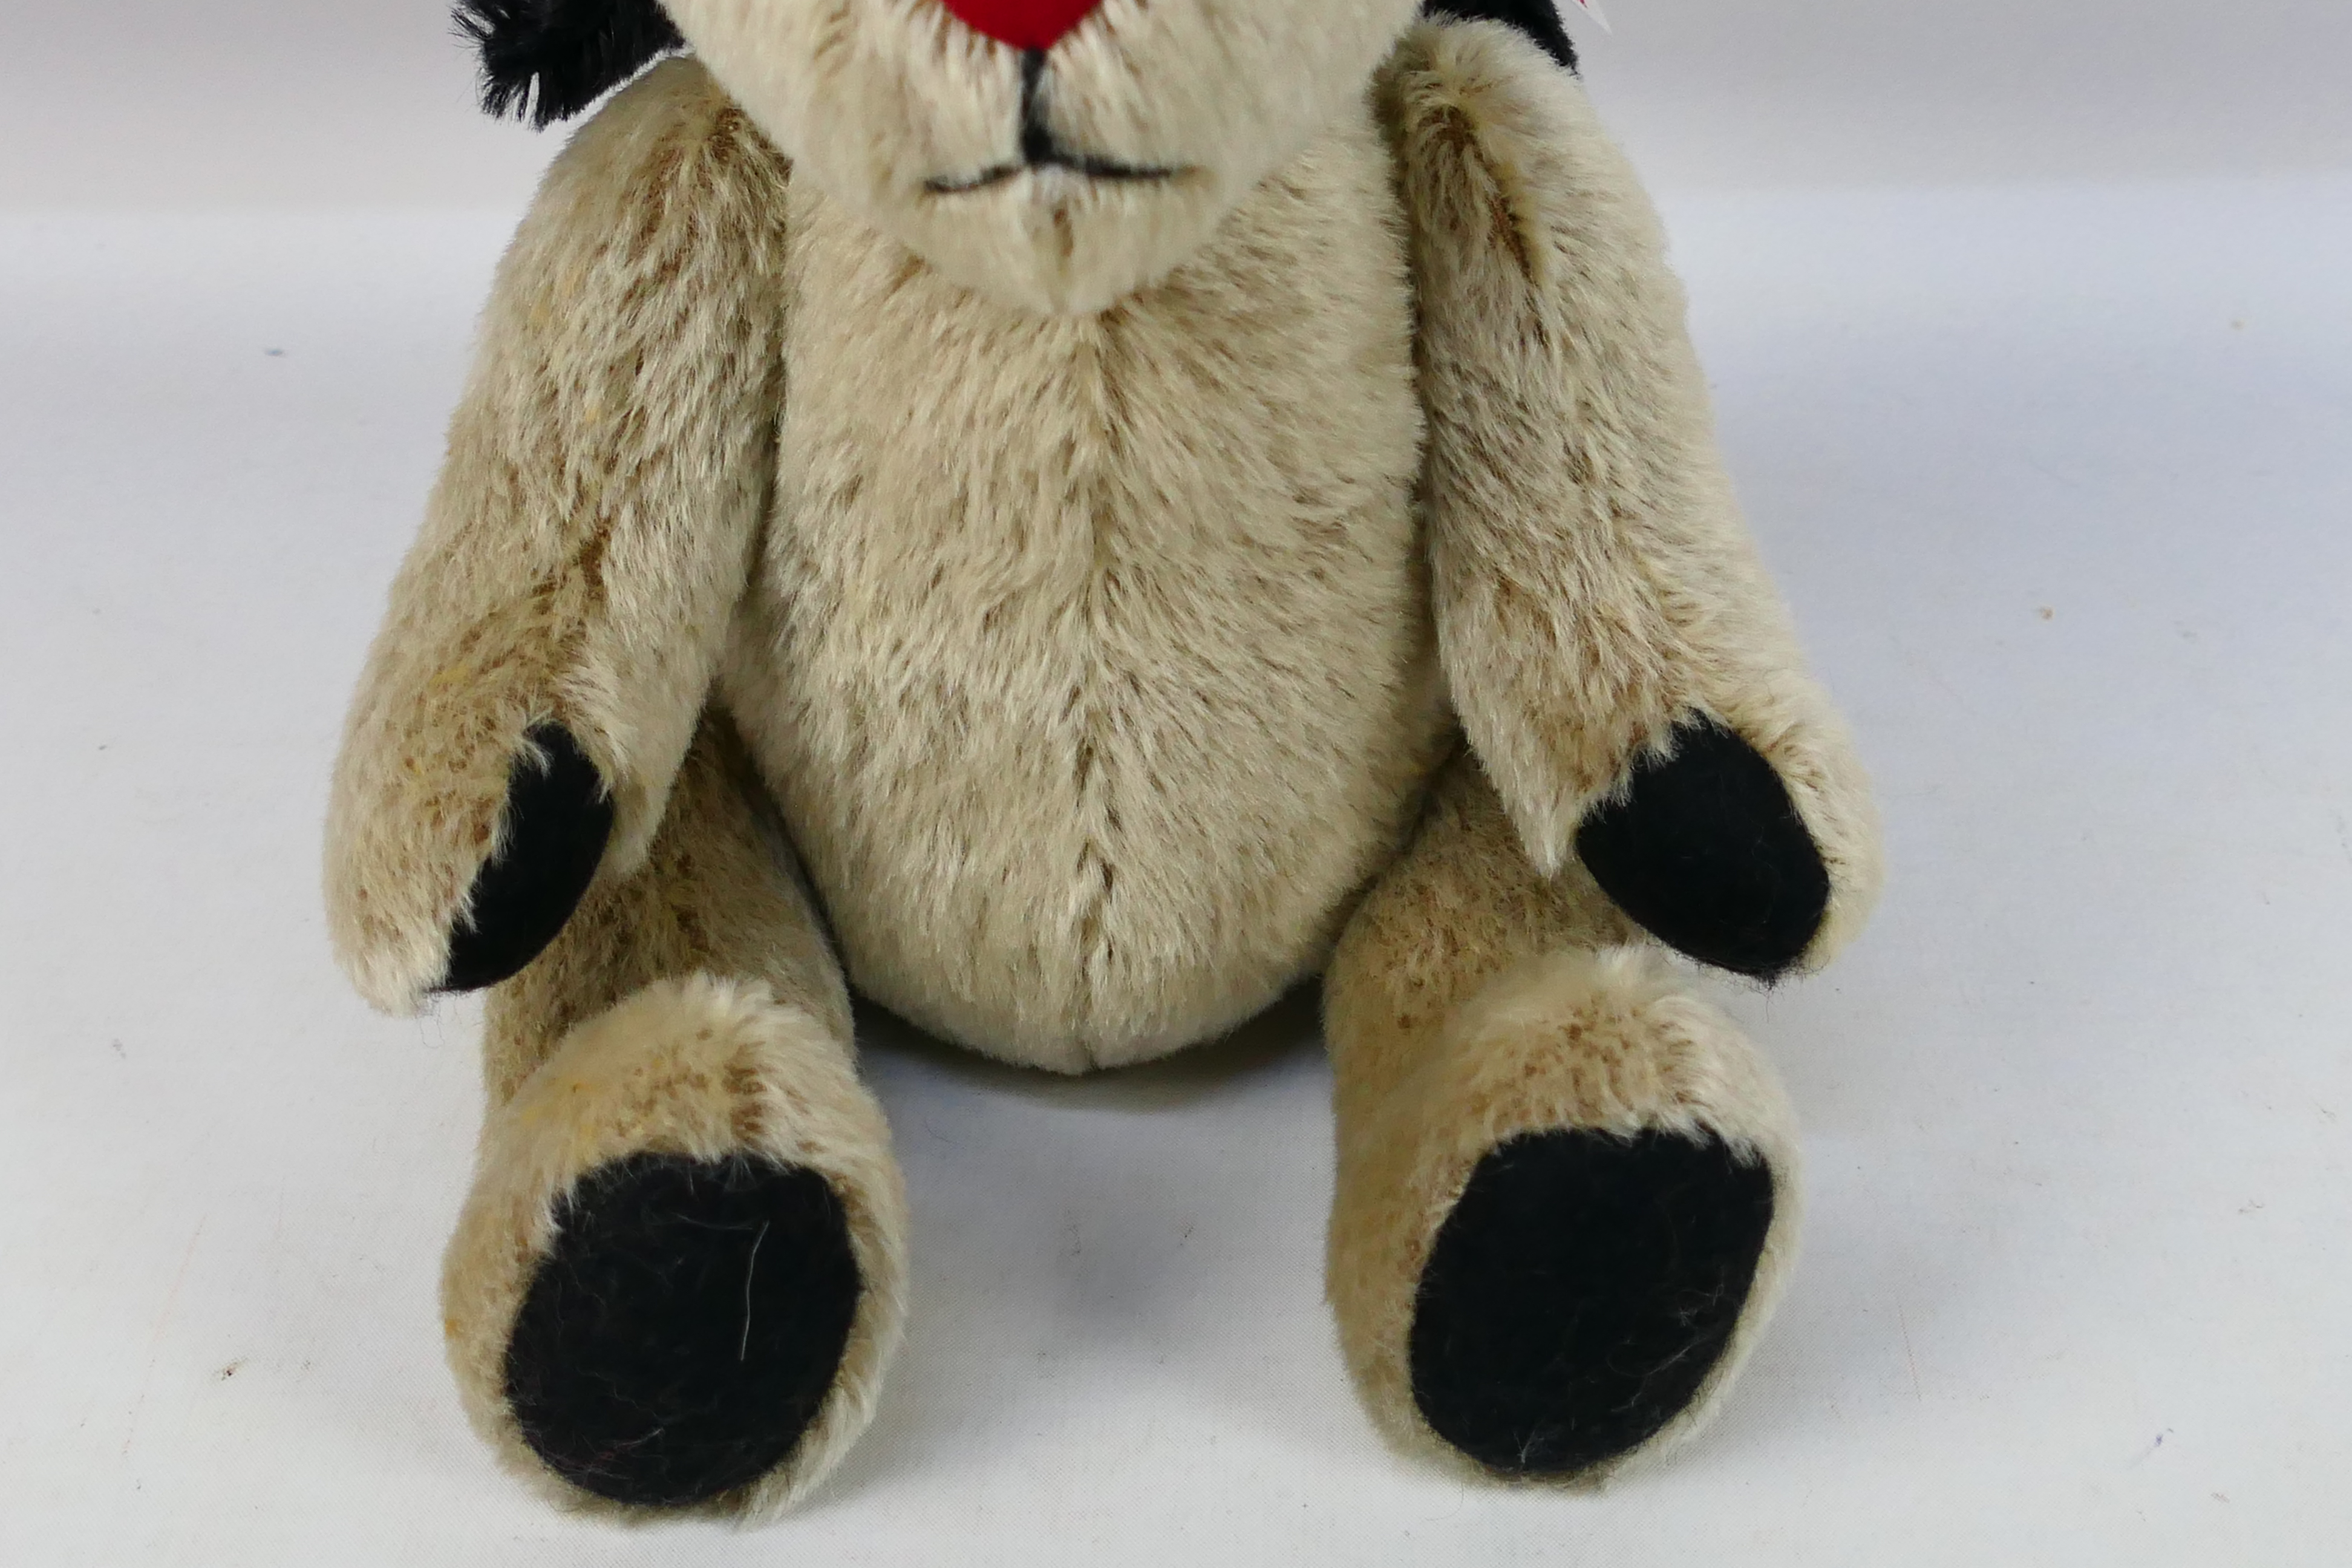 Steiff - Sooty Show - Plush - A Sweep Plush (#664410) from The Sooty Show, - Image 3 of 8